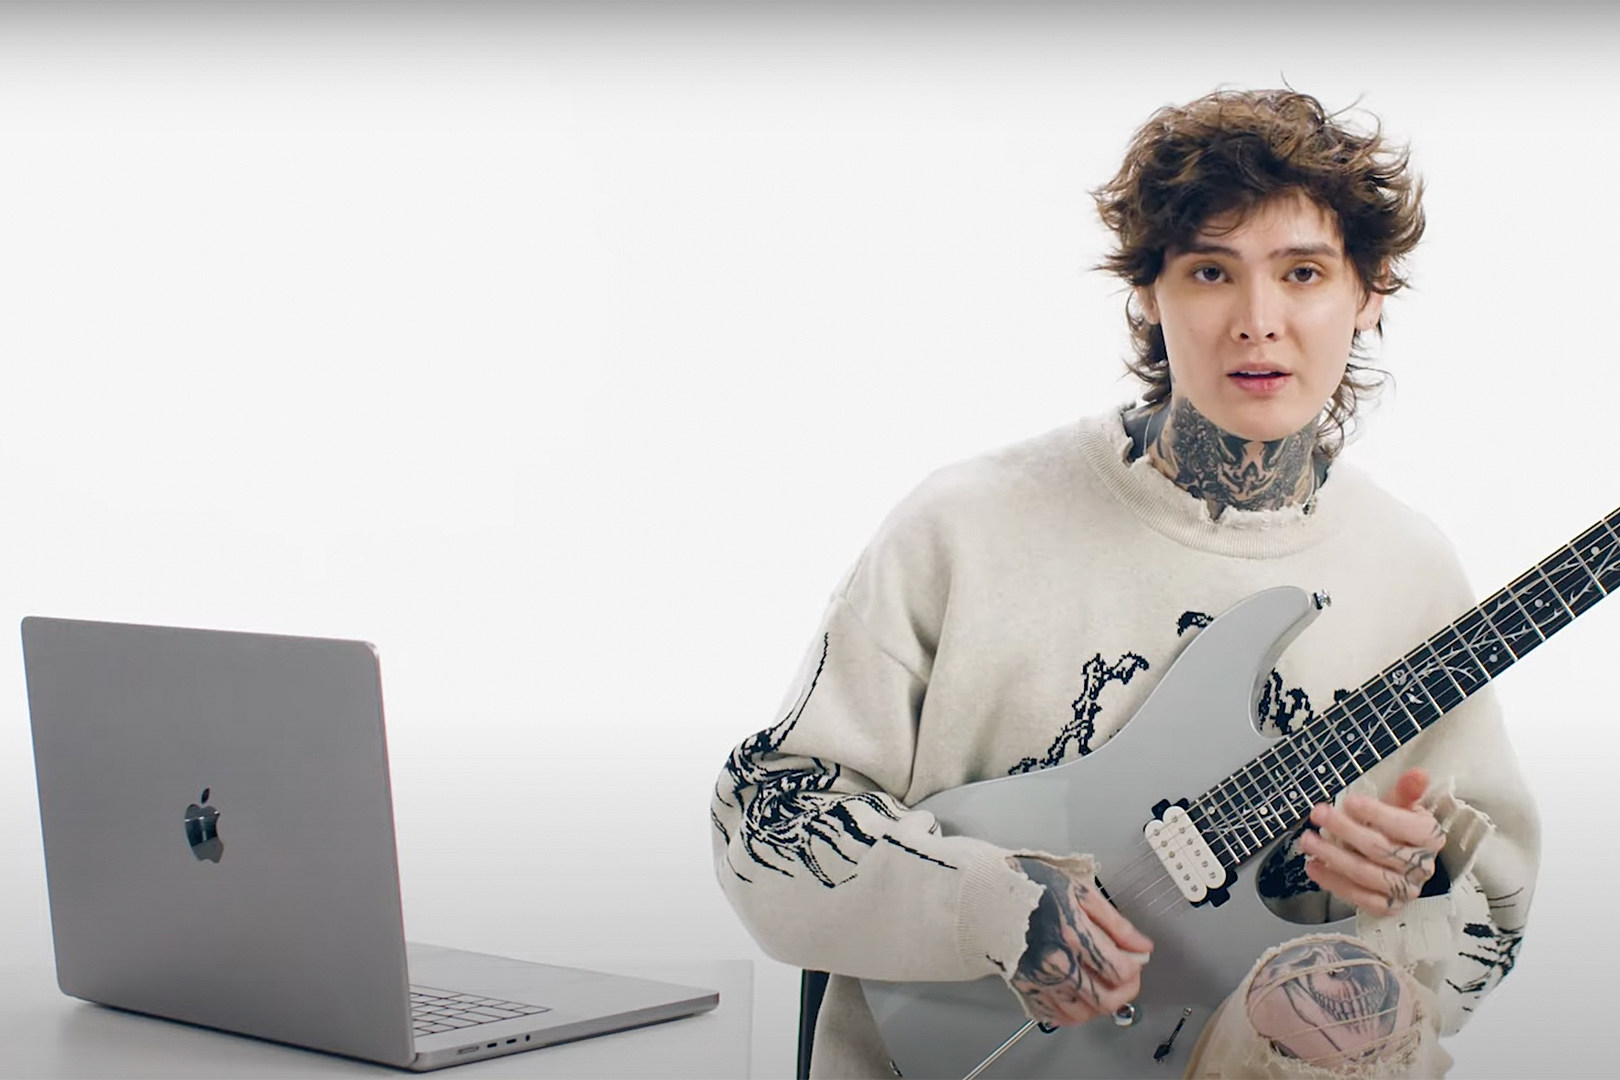 Polyphia Guitarist Answers Internet's Guitar Questions for Wired